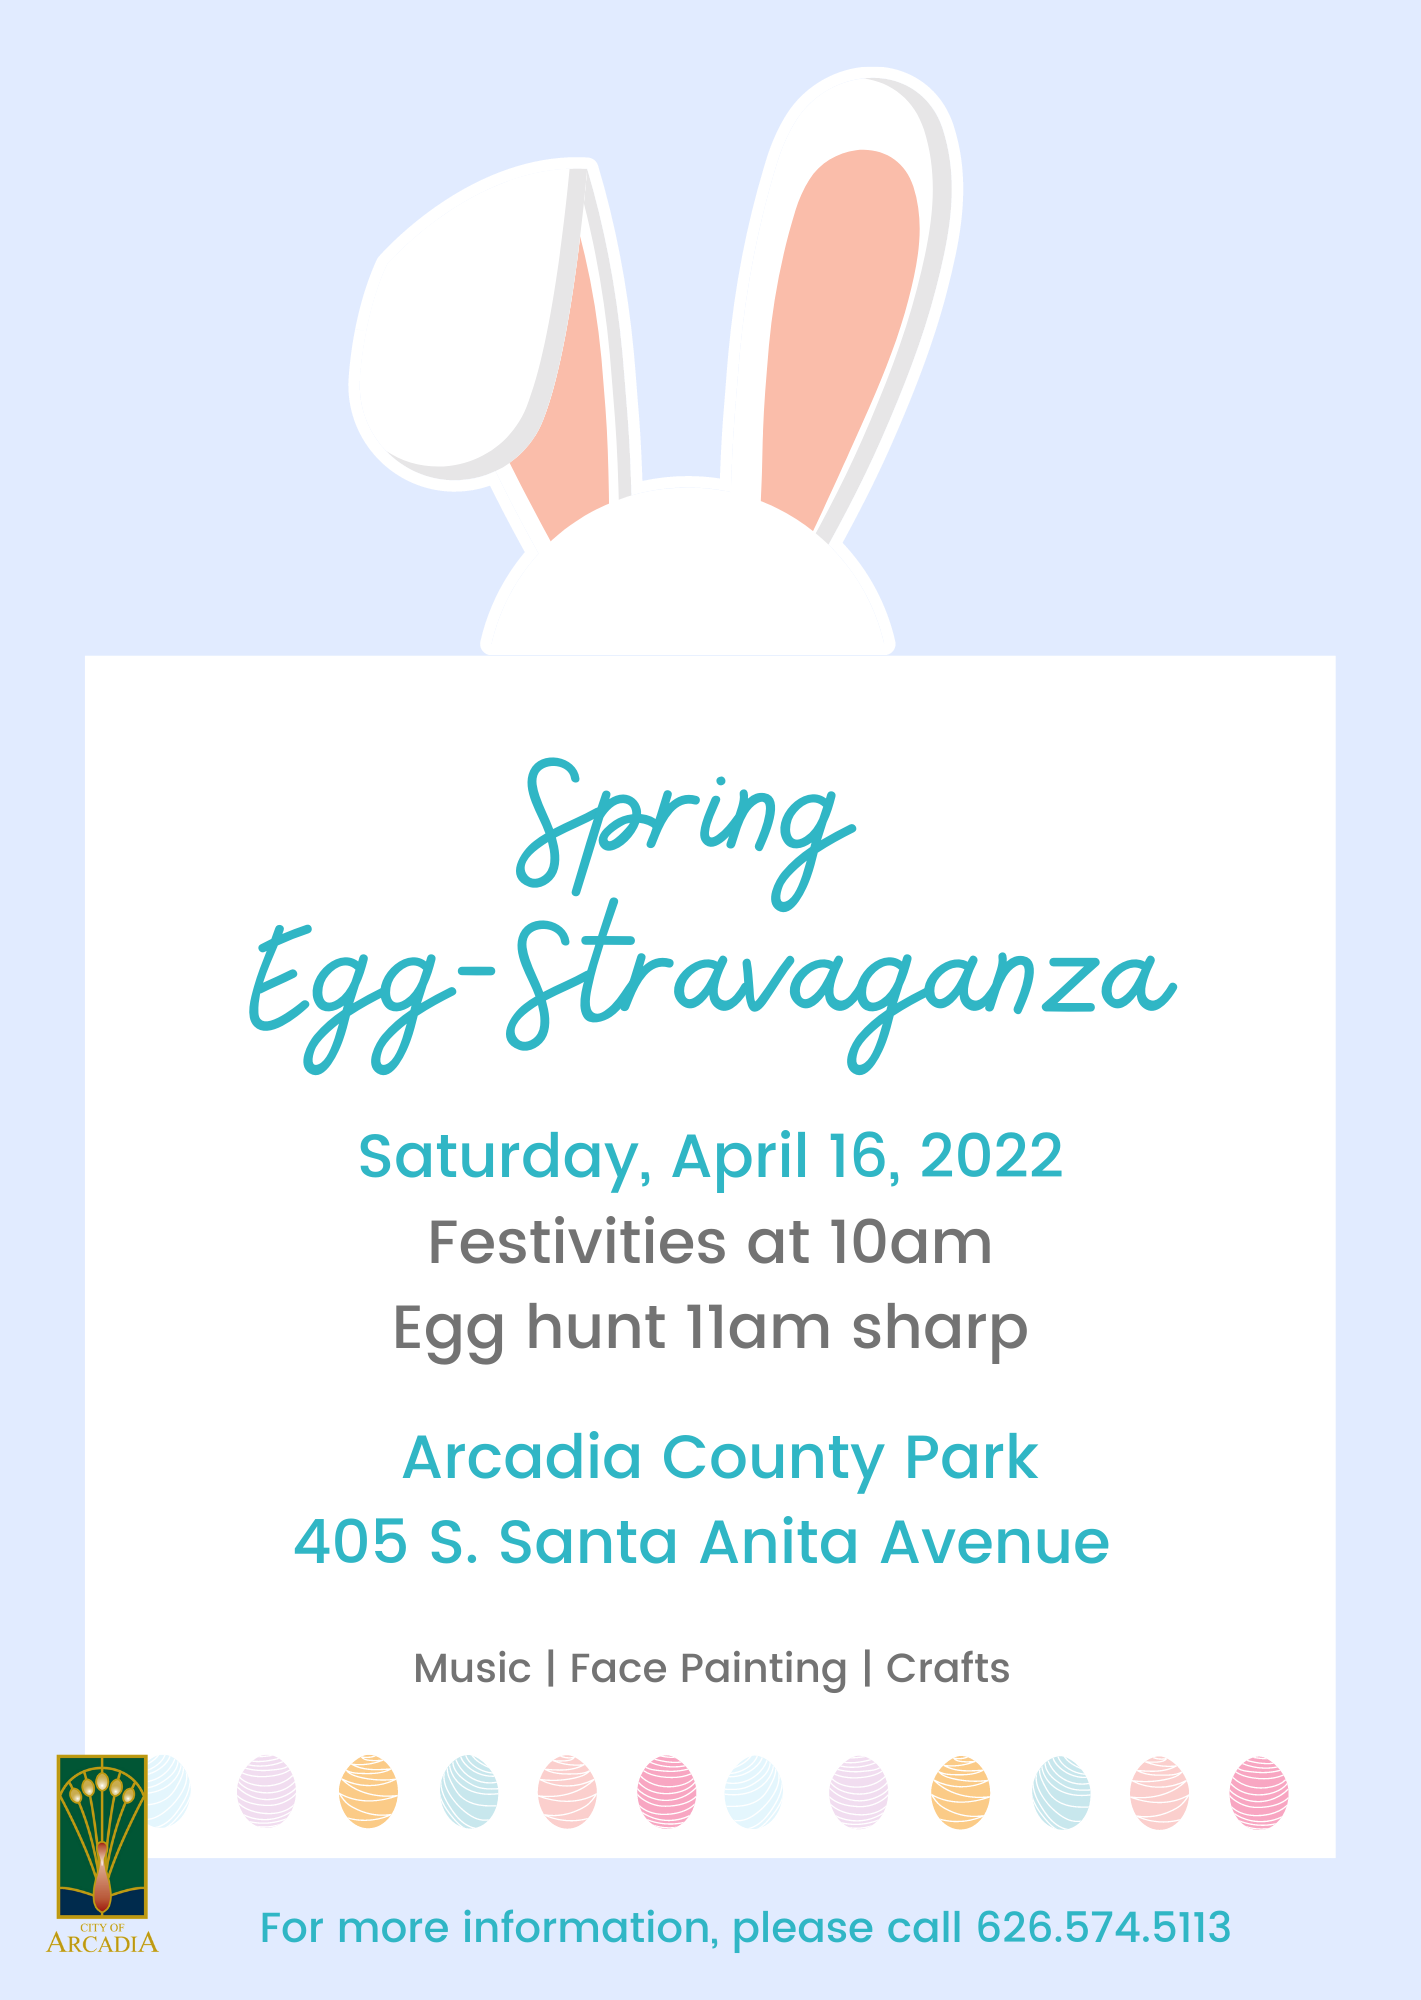 City of Arcadia spring egg-stravaganza flyer for event 